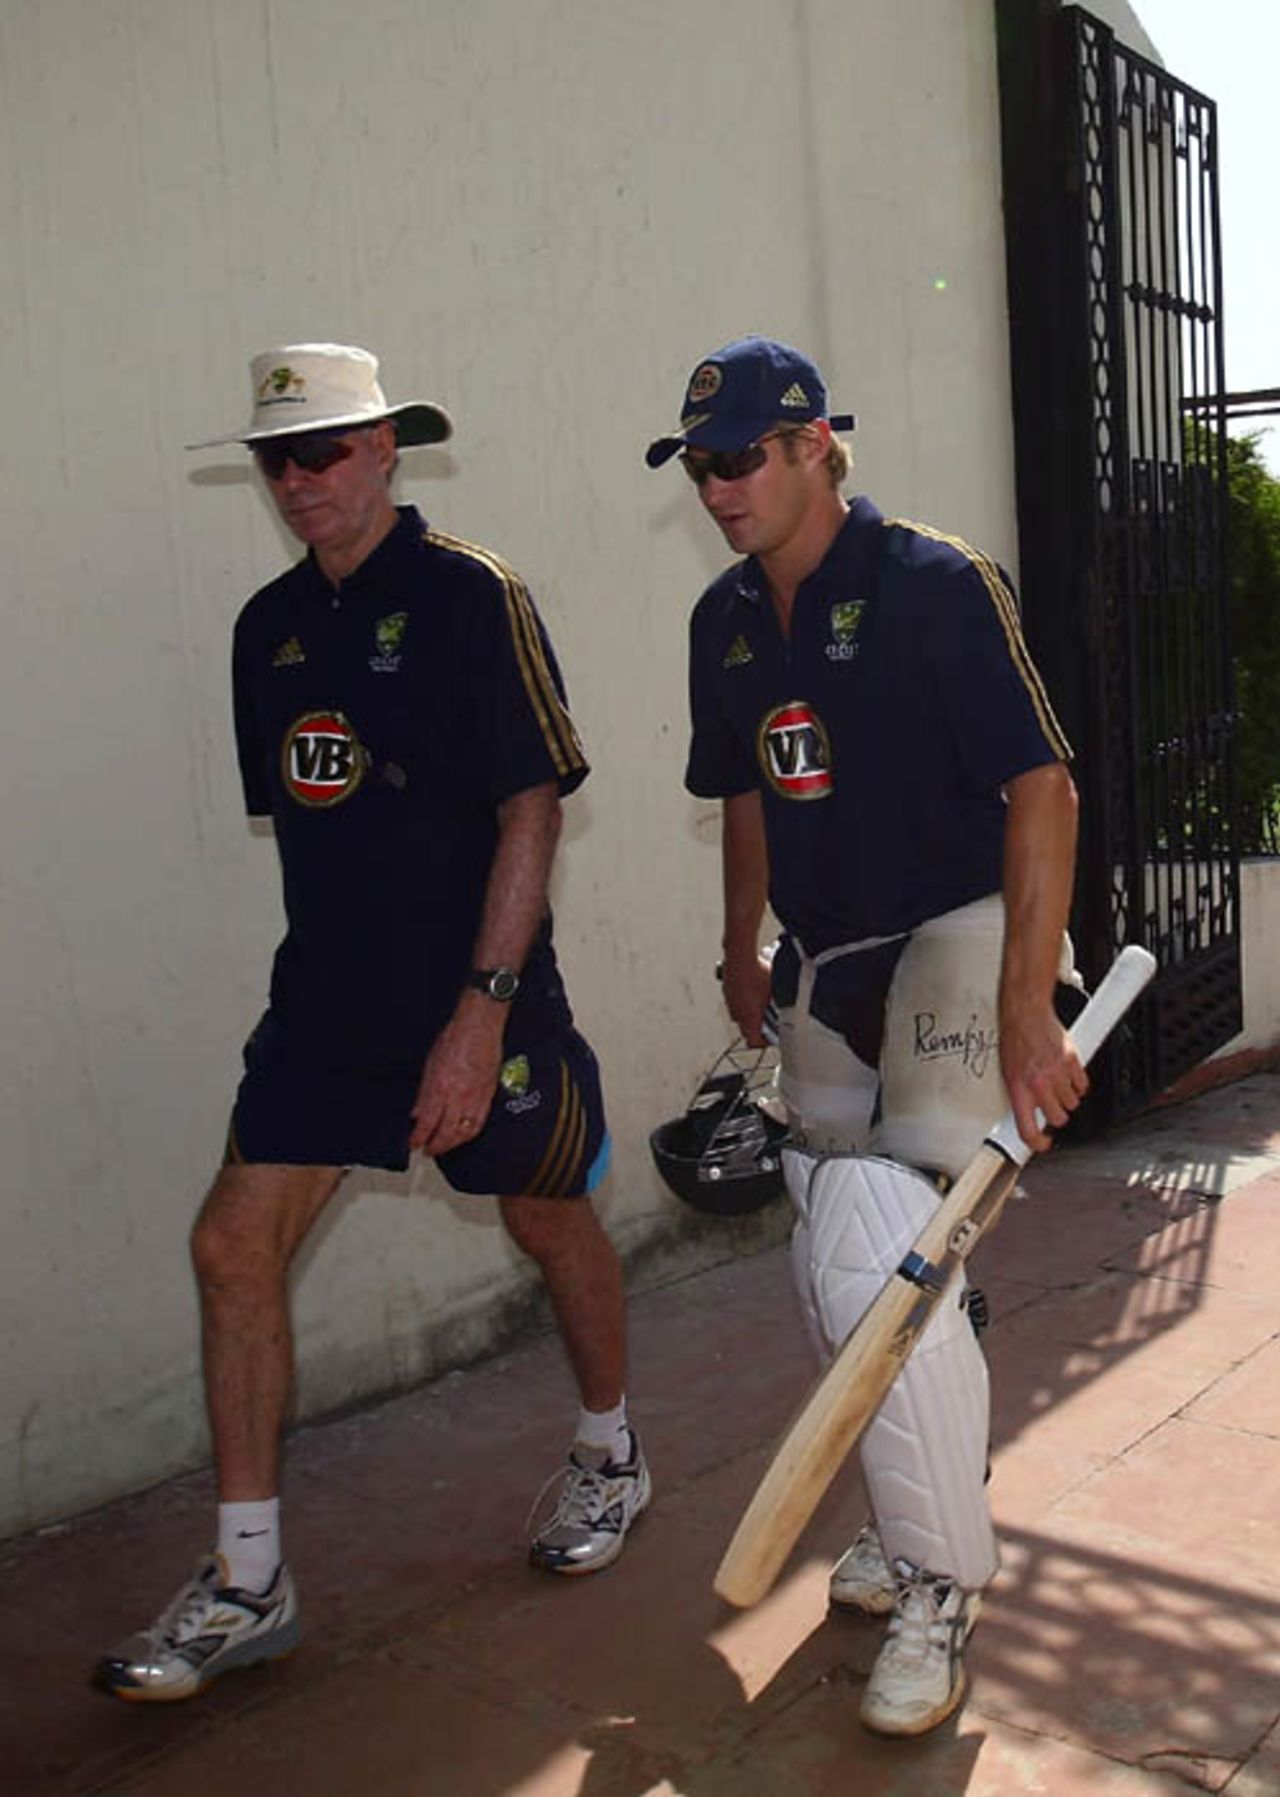 Greg Chappell and Shane Watson exit the ground after practice, Mohali, October 15, 2008